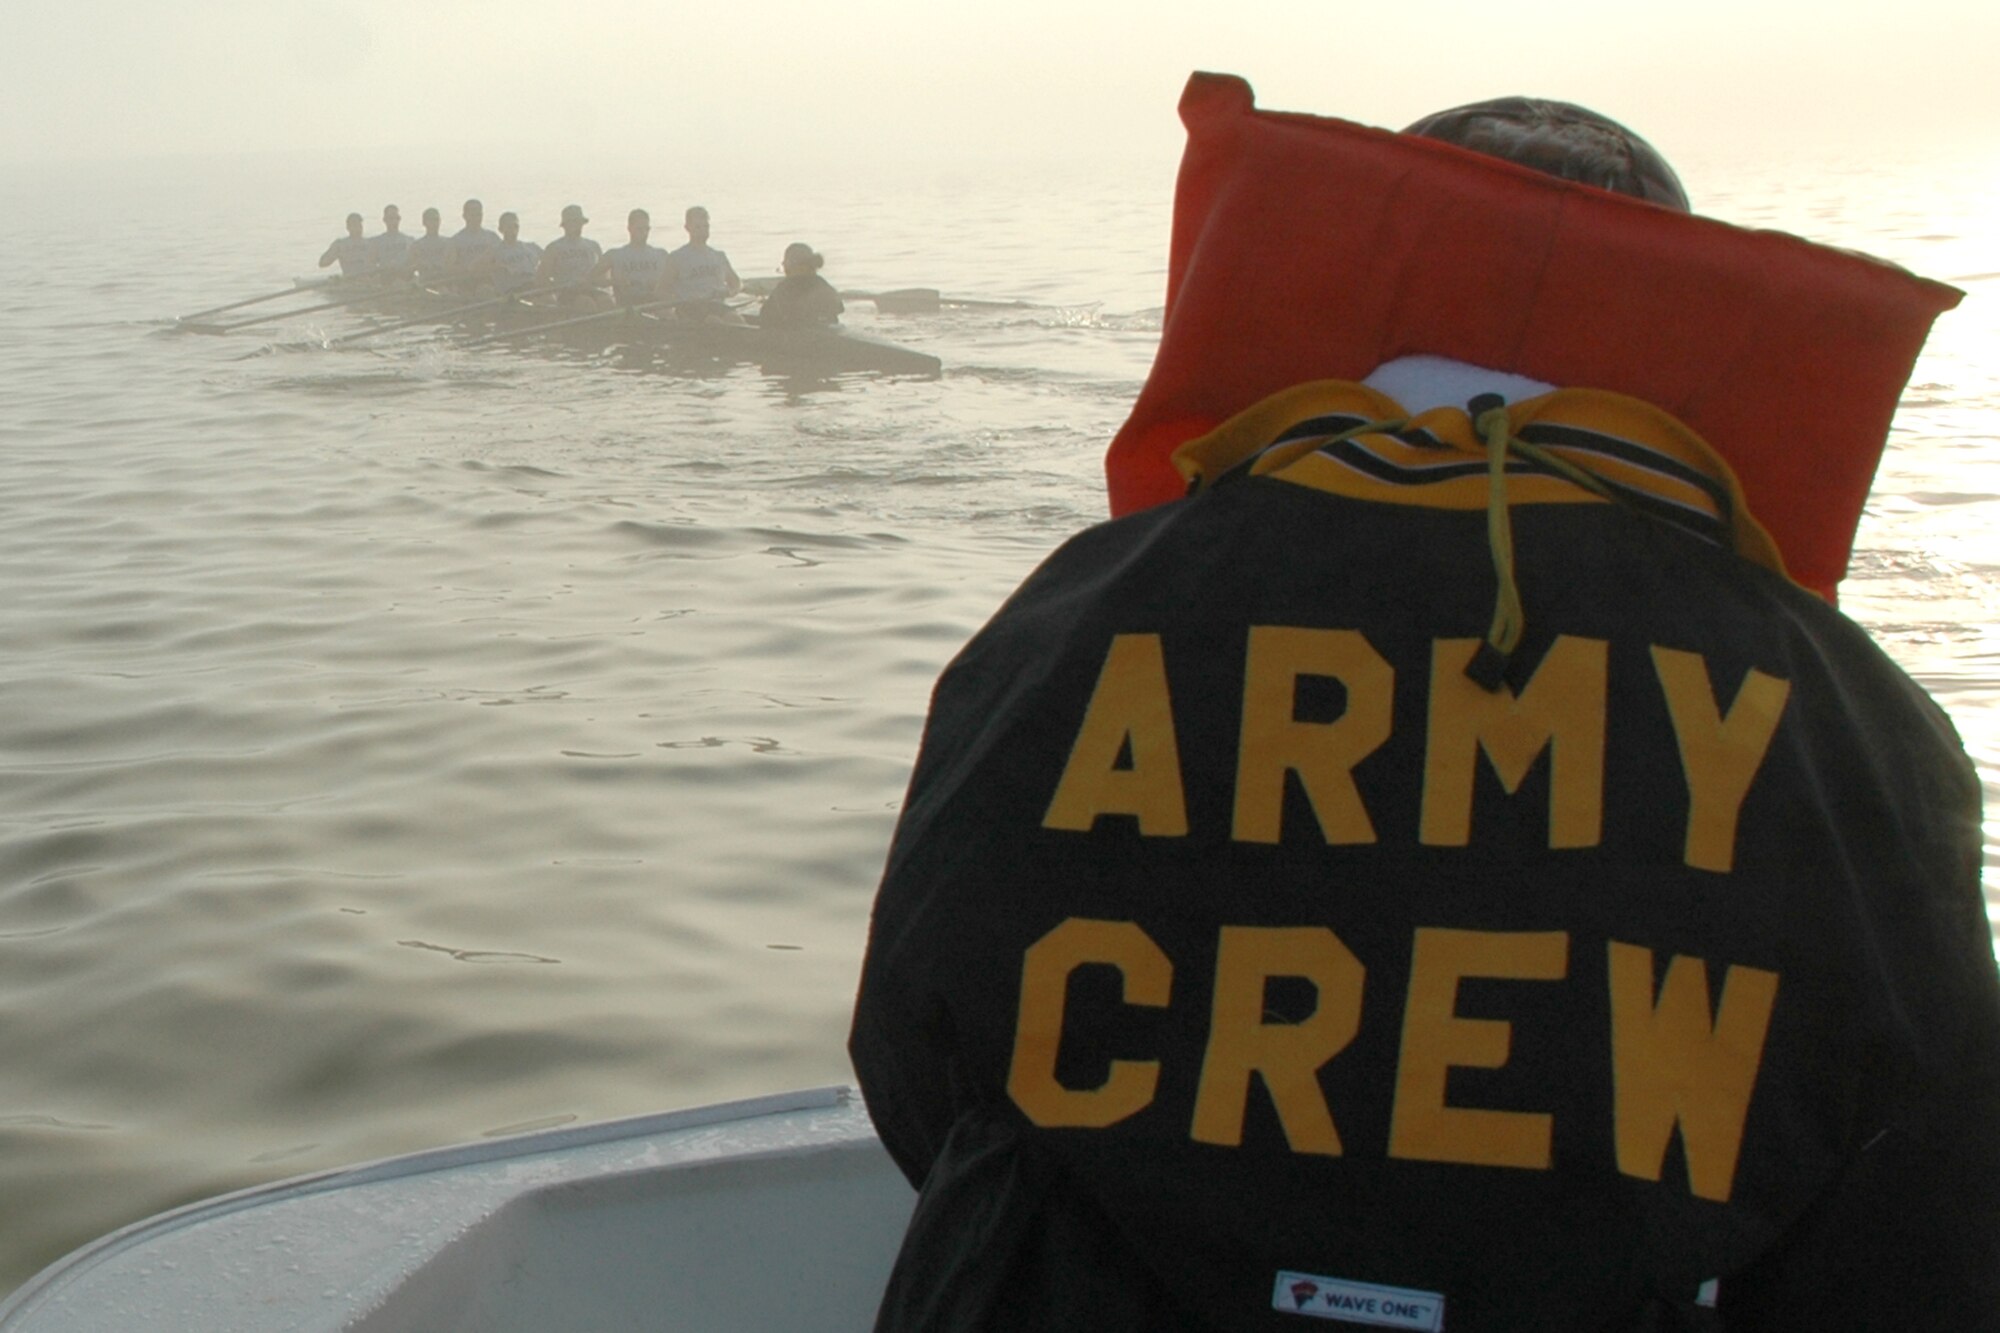 EGLIN AIR FORCE BASE, Fla. -- Jim Swisher, U.S. Military Academy Crew Team assistant coach, communicates to the men's varsity and novice squads through a thick fog on the Choctawhatchee Bay during an early morning workout March 13. The fog forced them to leave the bay and head for safer waters in the local bayous. The Army crew team is split up into four squads: men's varsity and novice, and women's varsity and novice. The team is here during their spring break to practice in the warmer Florida temperatures. (U.S. Air Force photo by Staff Sgt. Mike Meares)